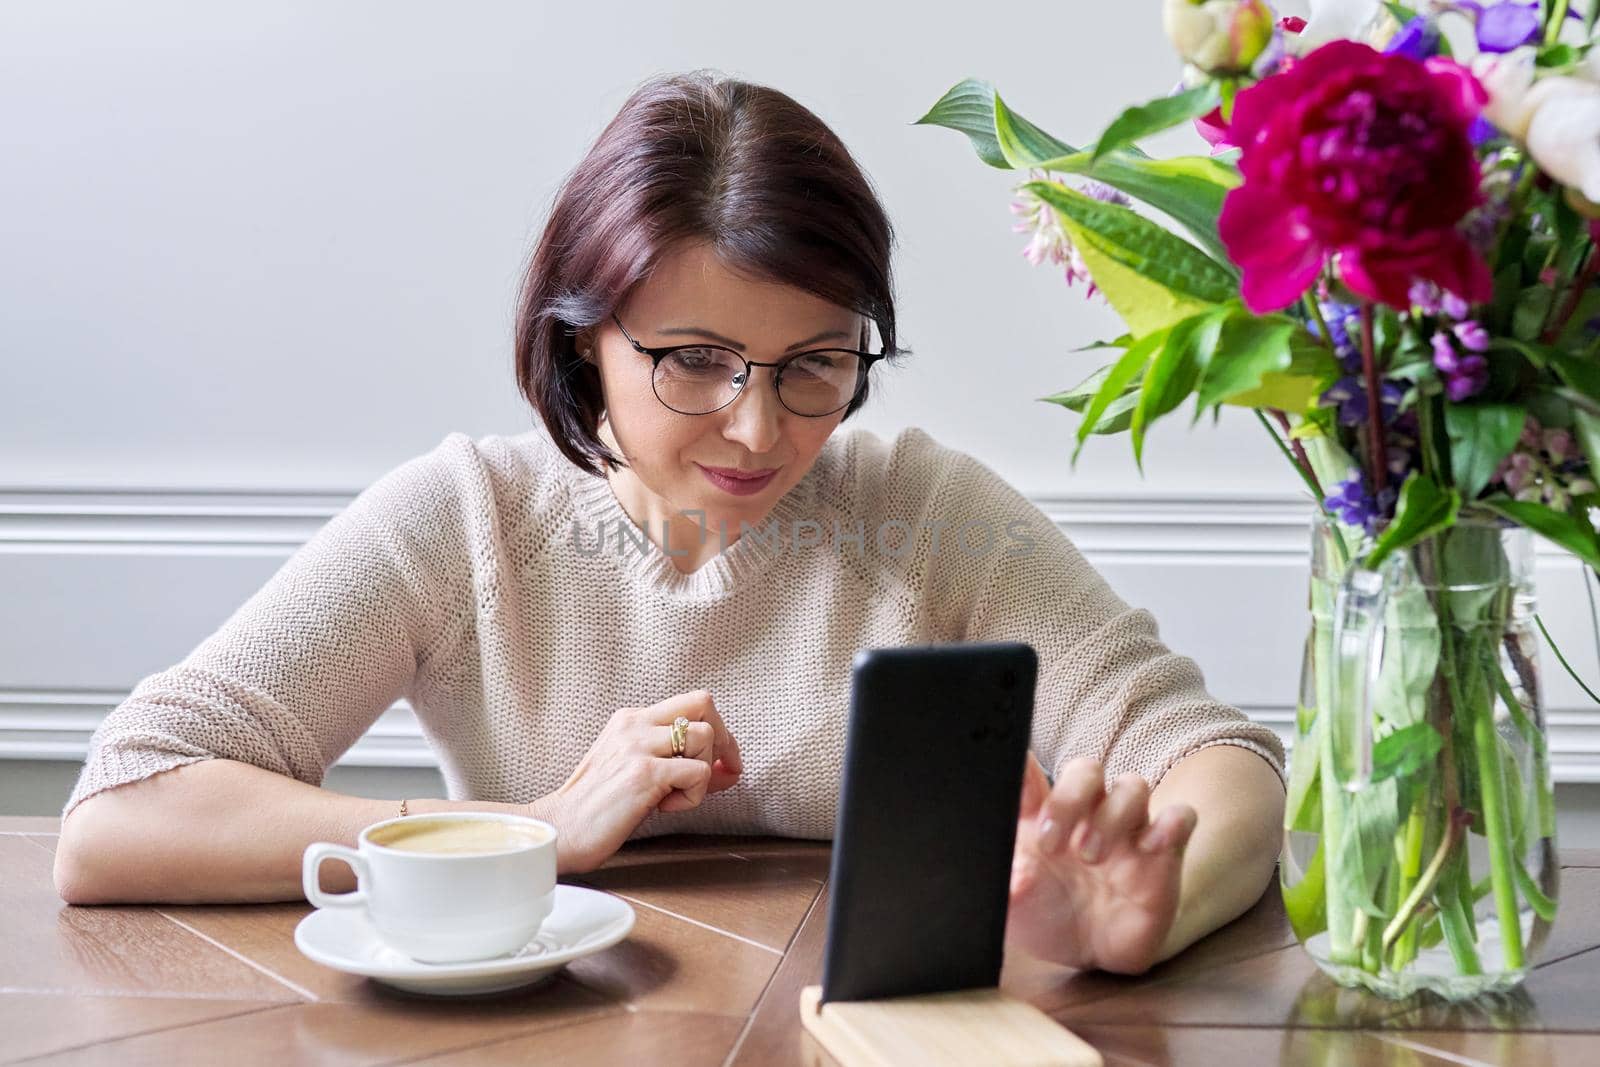 Middle-aged woman sitting at table looking at smartphone screen, female relaxing with cup of coffee, using technologies for relaxation. Lifestyle, people of mature age, home, technology concept